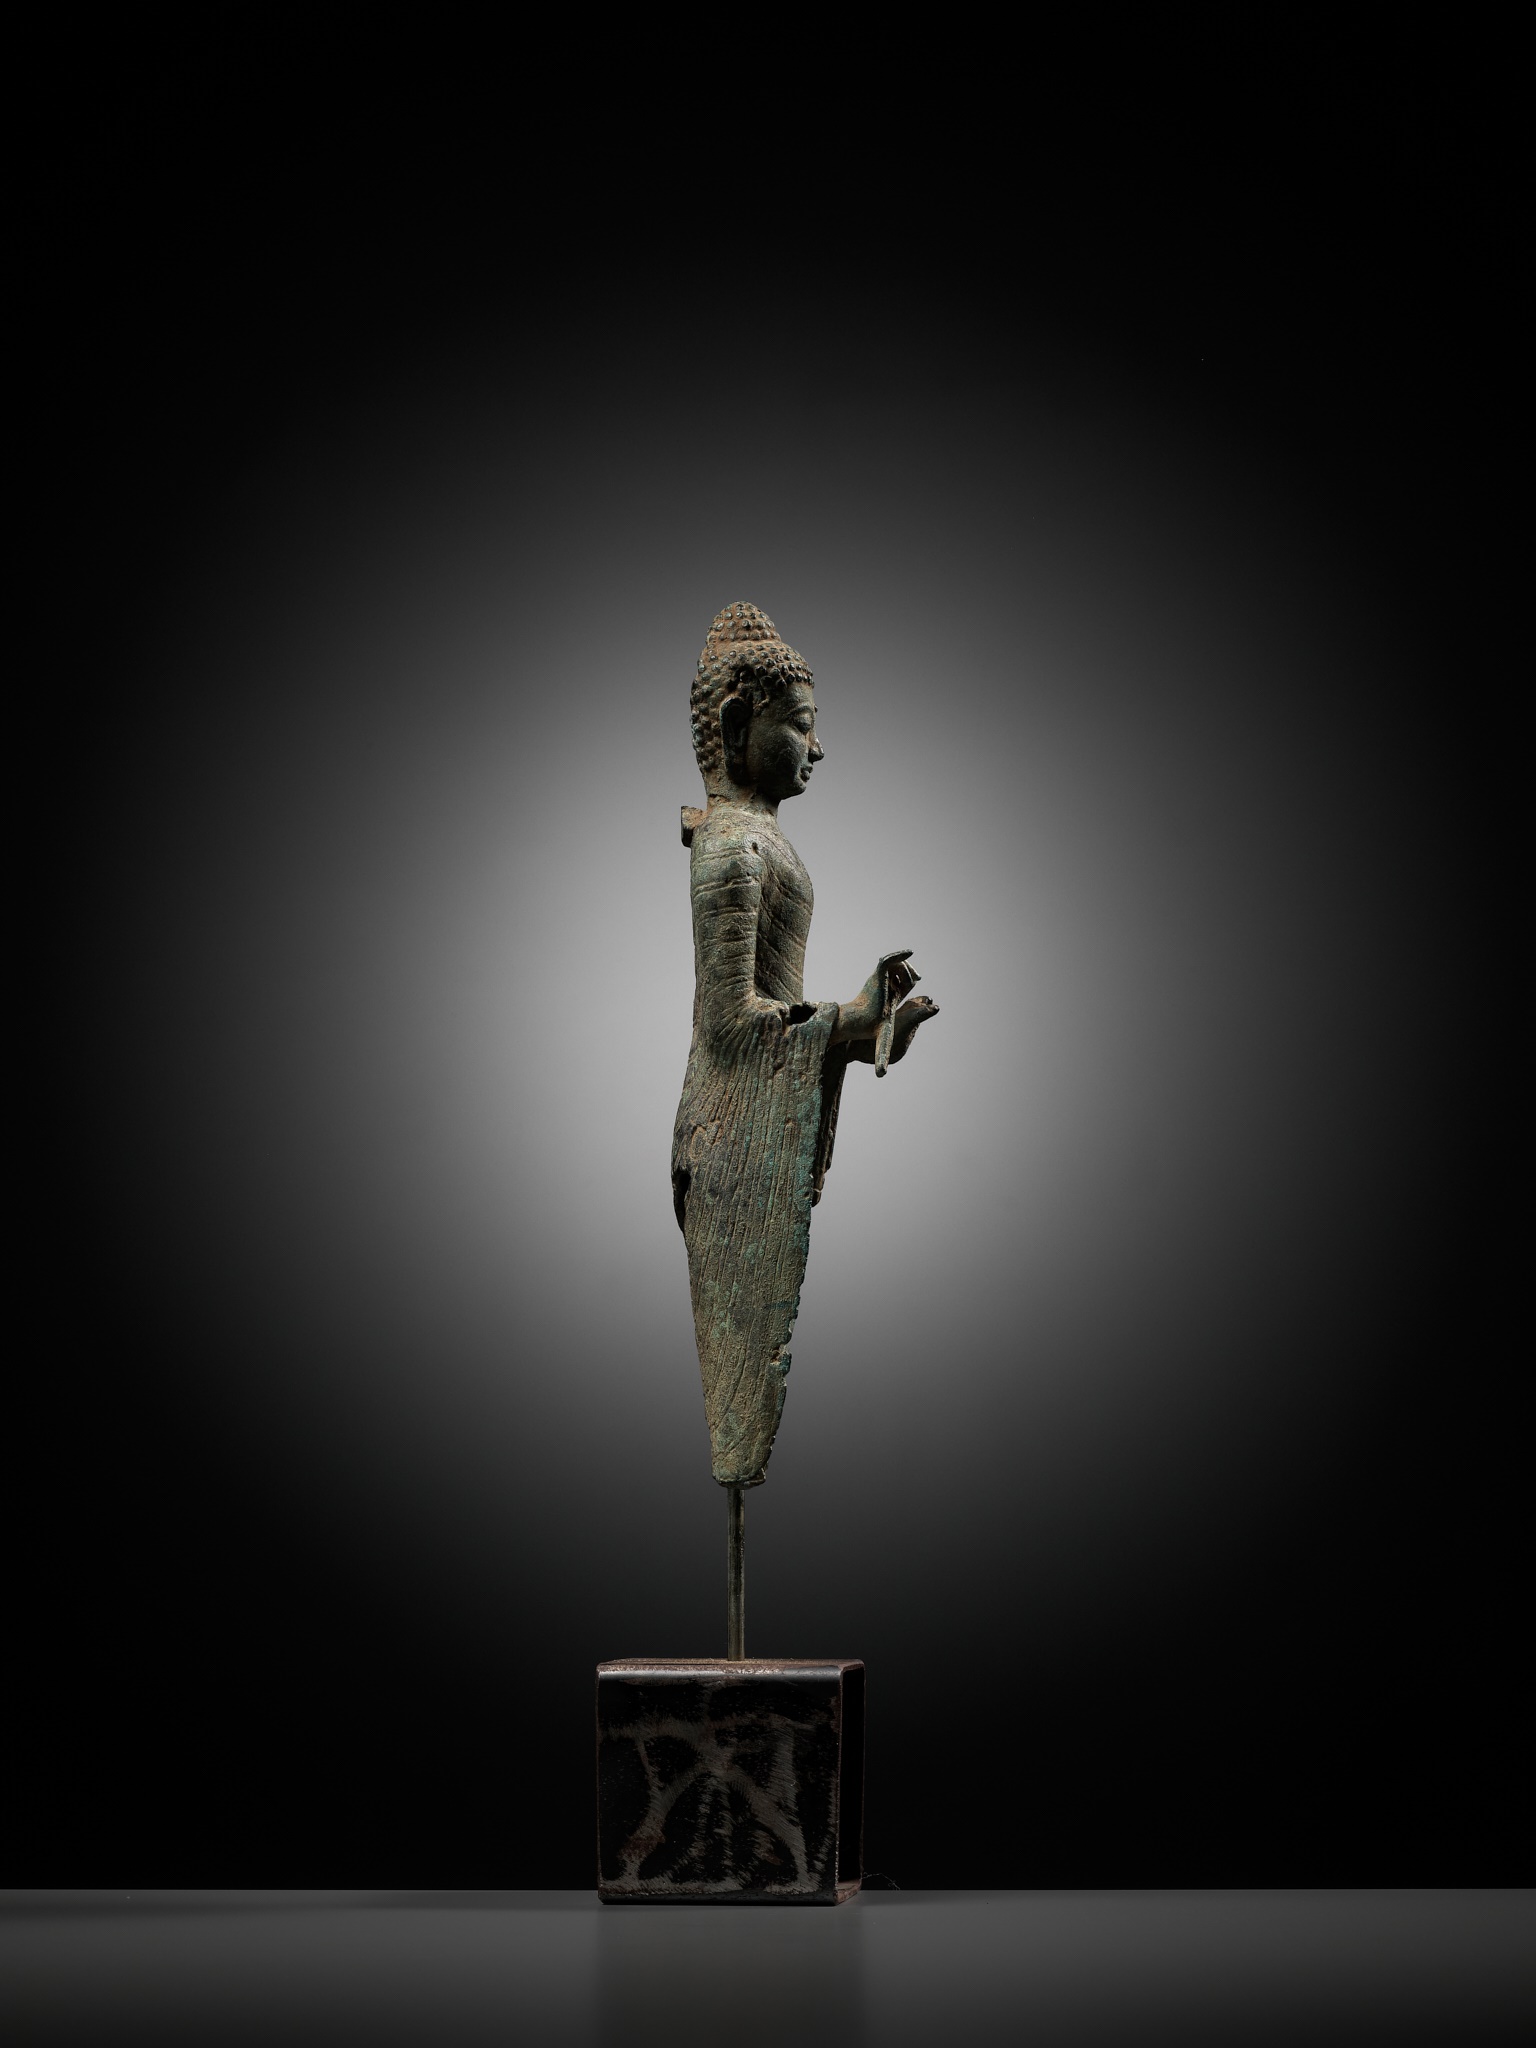 A FRAGMENTARY BRONZE BUST OF BUDDHA, INDONESIA, 16TH-17TH CENTURY - Image 8 of 9